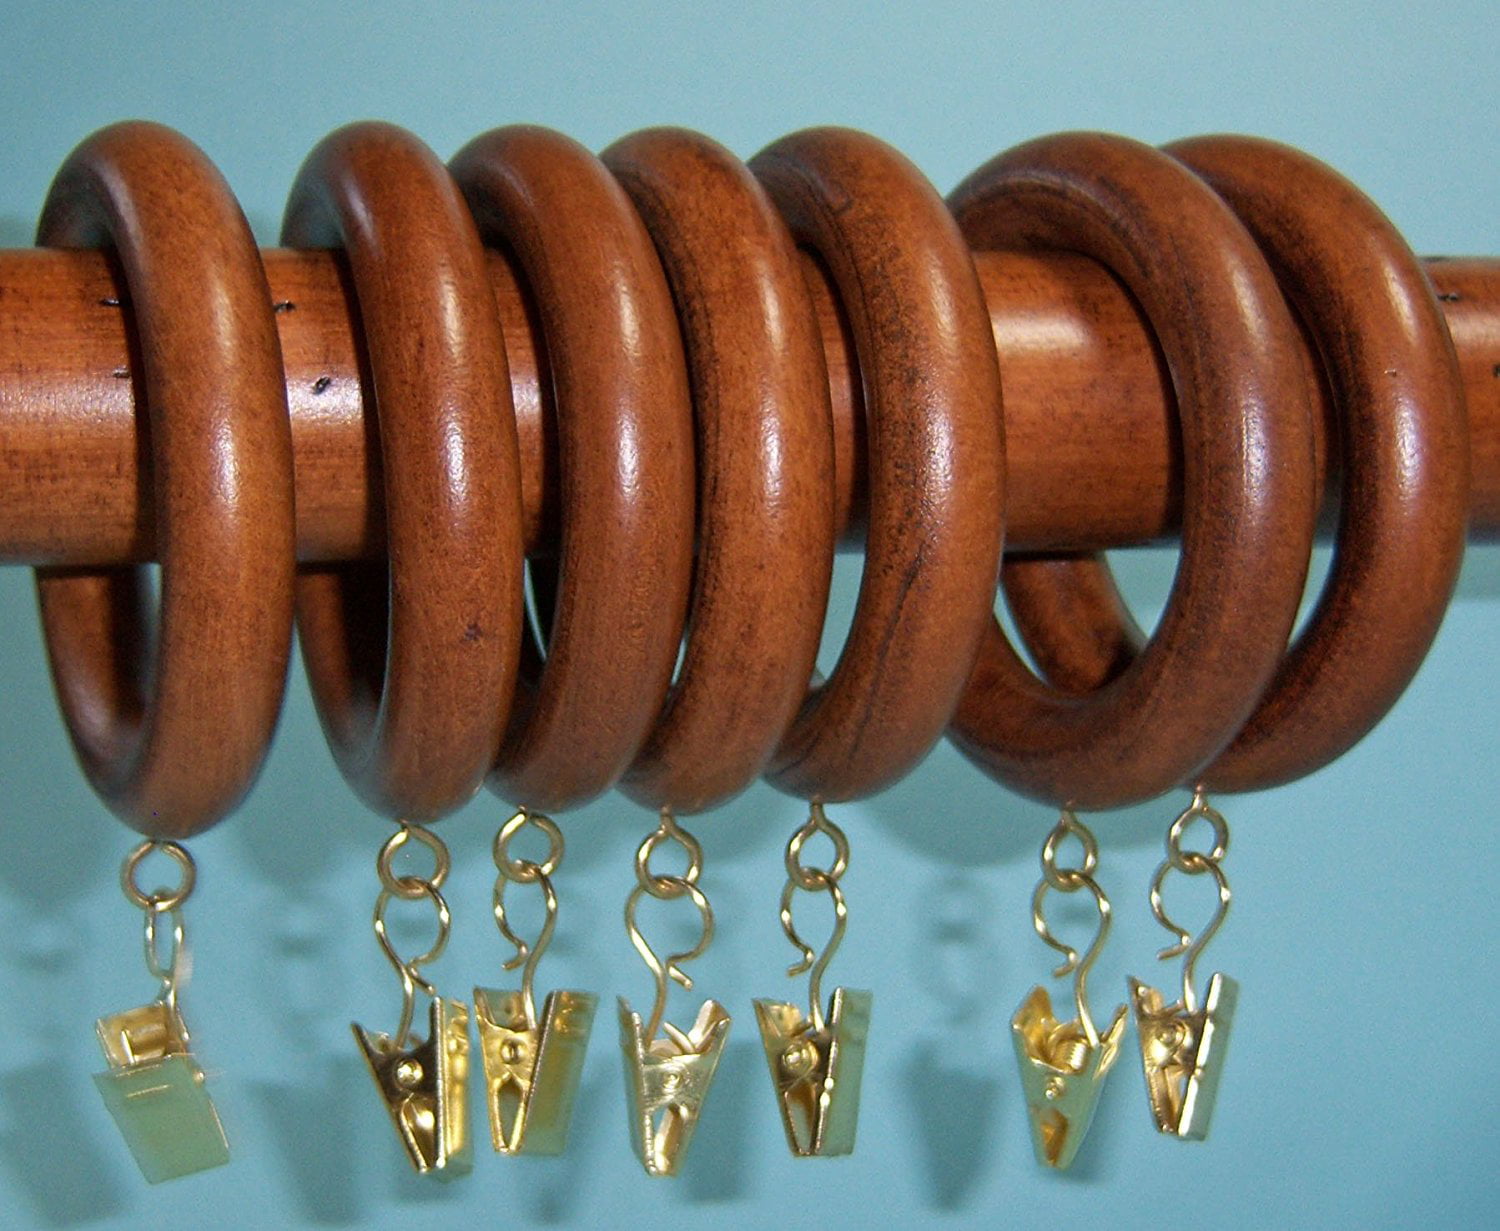 Wood Dry Rings For A 1 3 8 Pole 7, Wooden Curtain Rod Rings With Clips